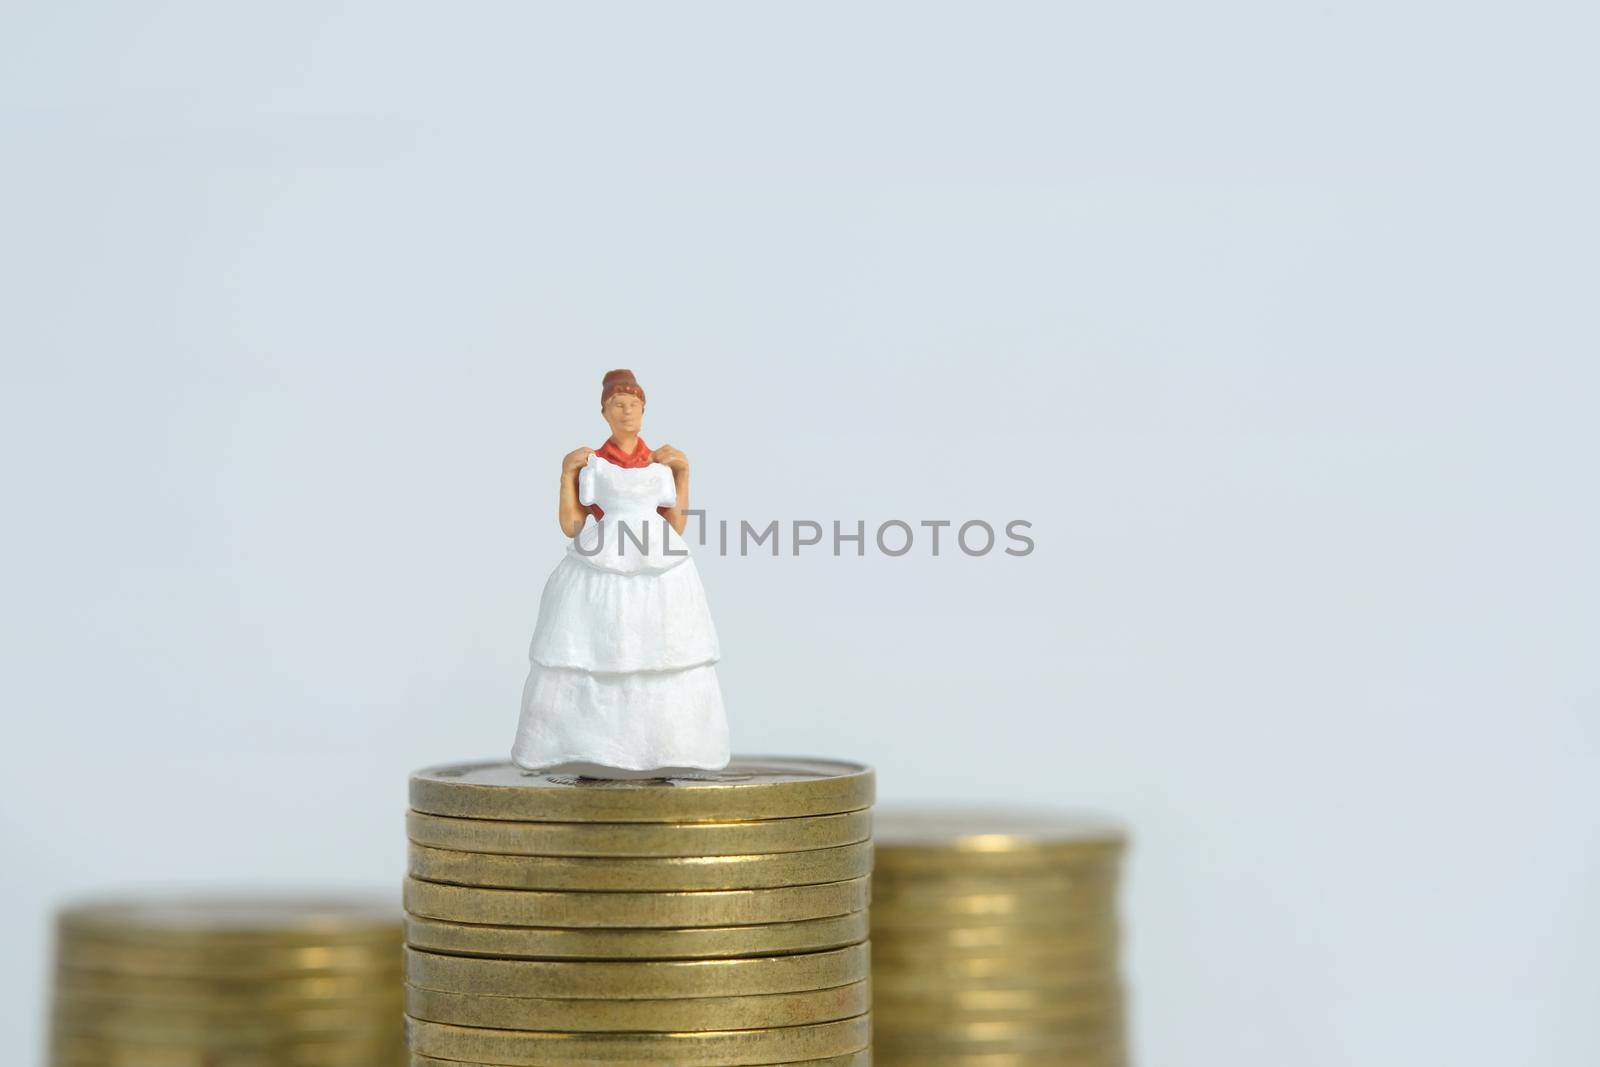 Wedding dress budget for bride, miniature people illustration concept. Woman standing above coin money stack. Image photo by Macrostud